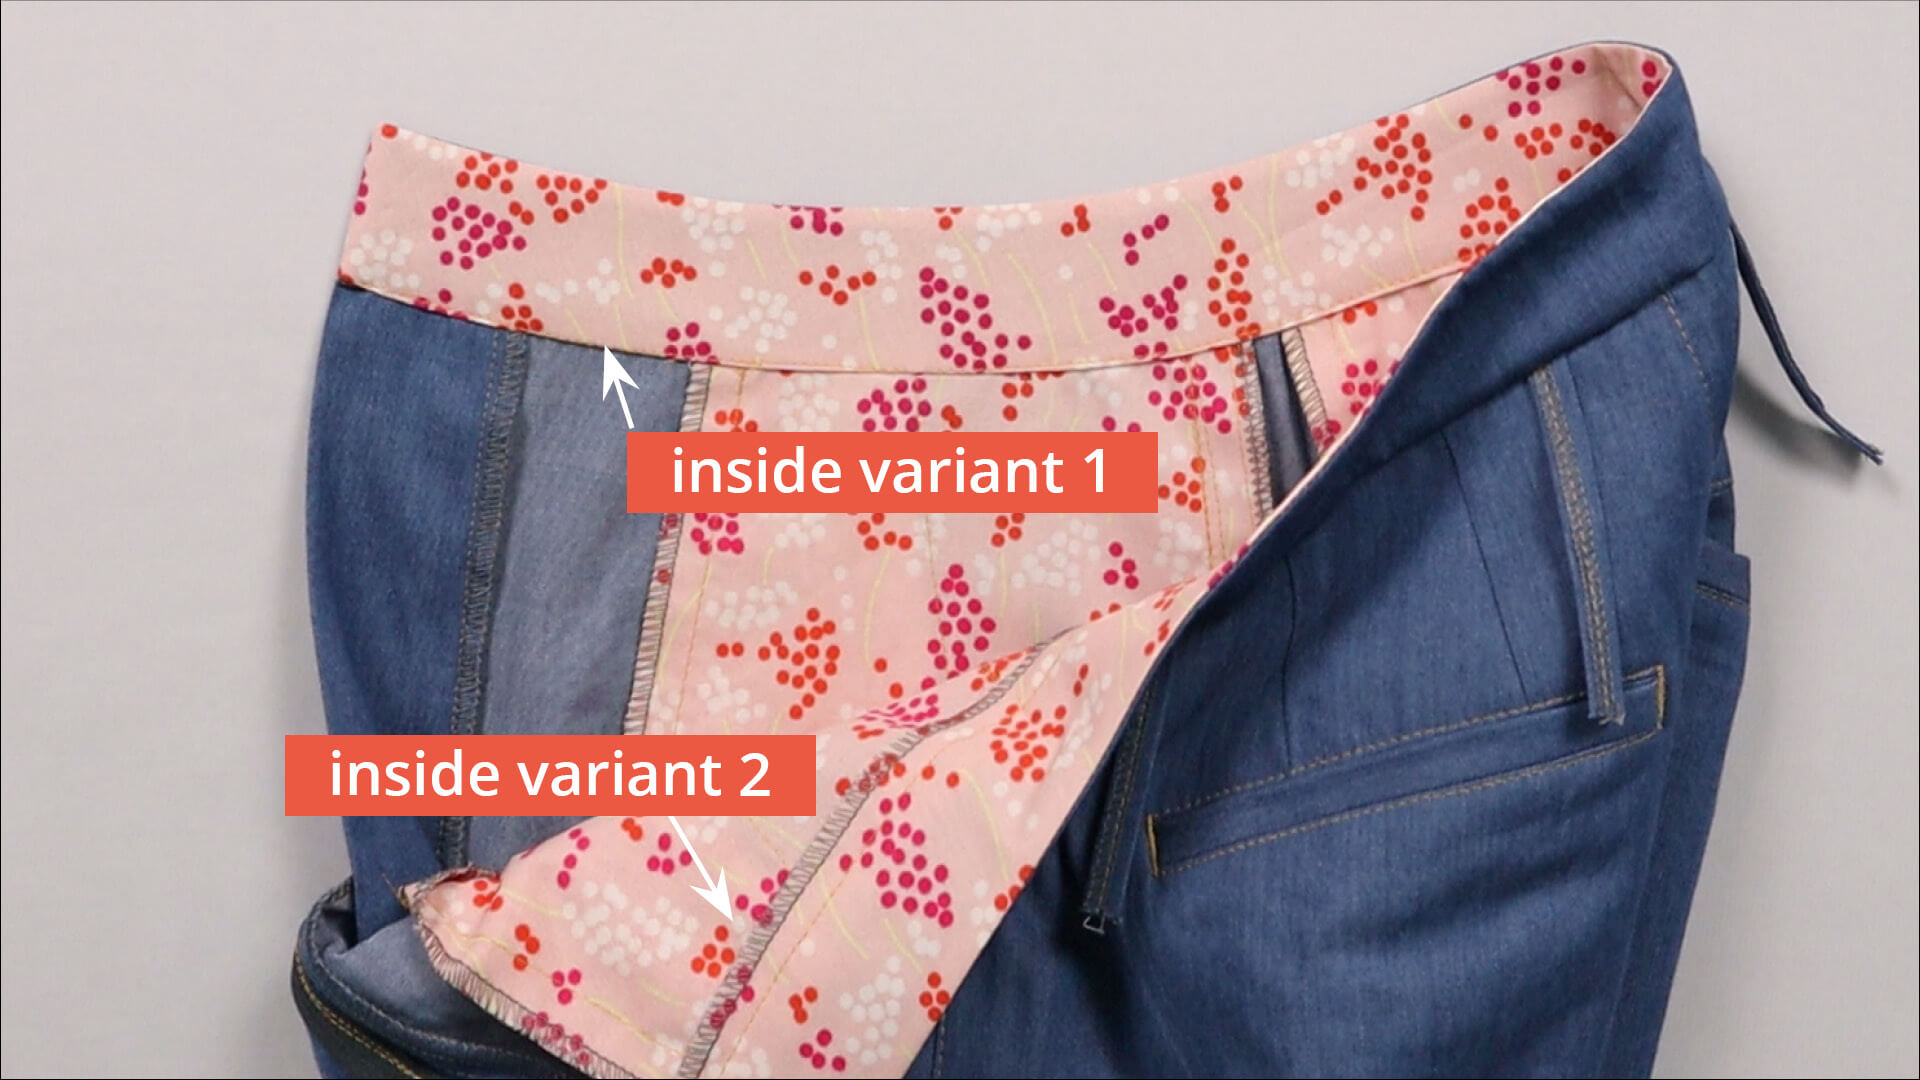 The picture shows two variations of how the inner waistband can be finished.